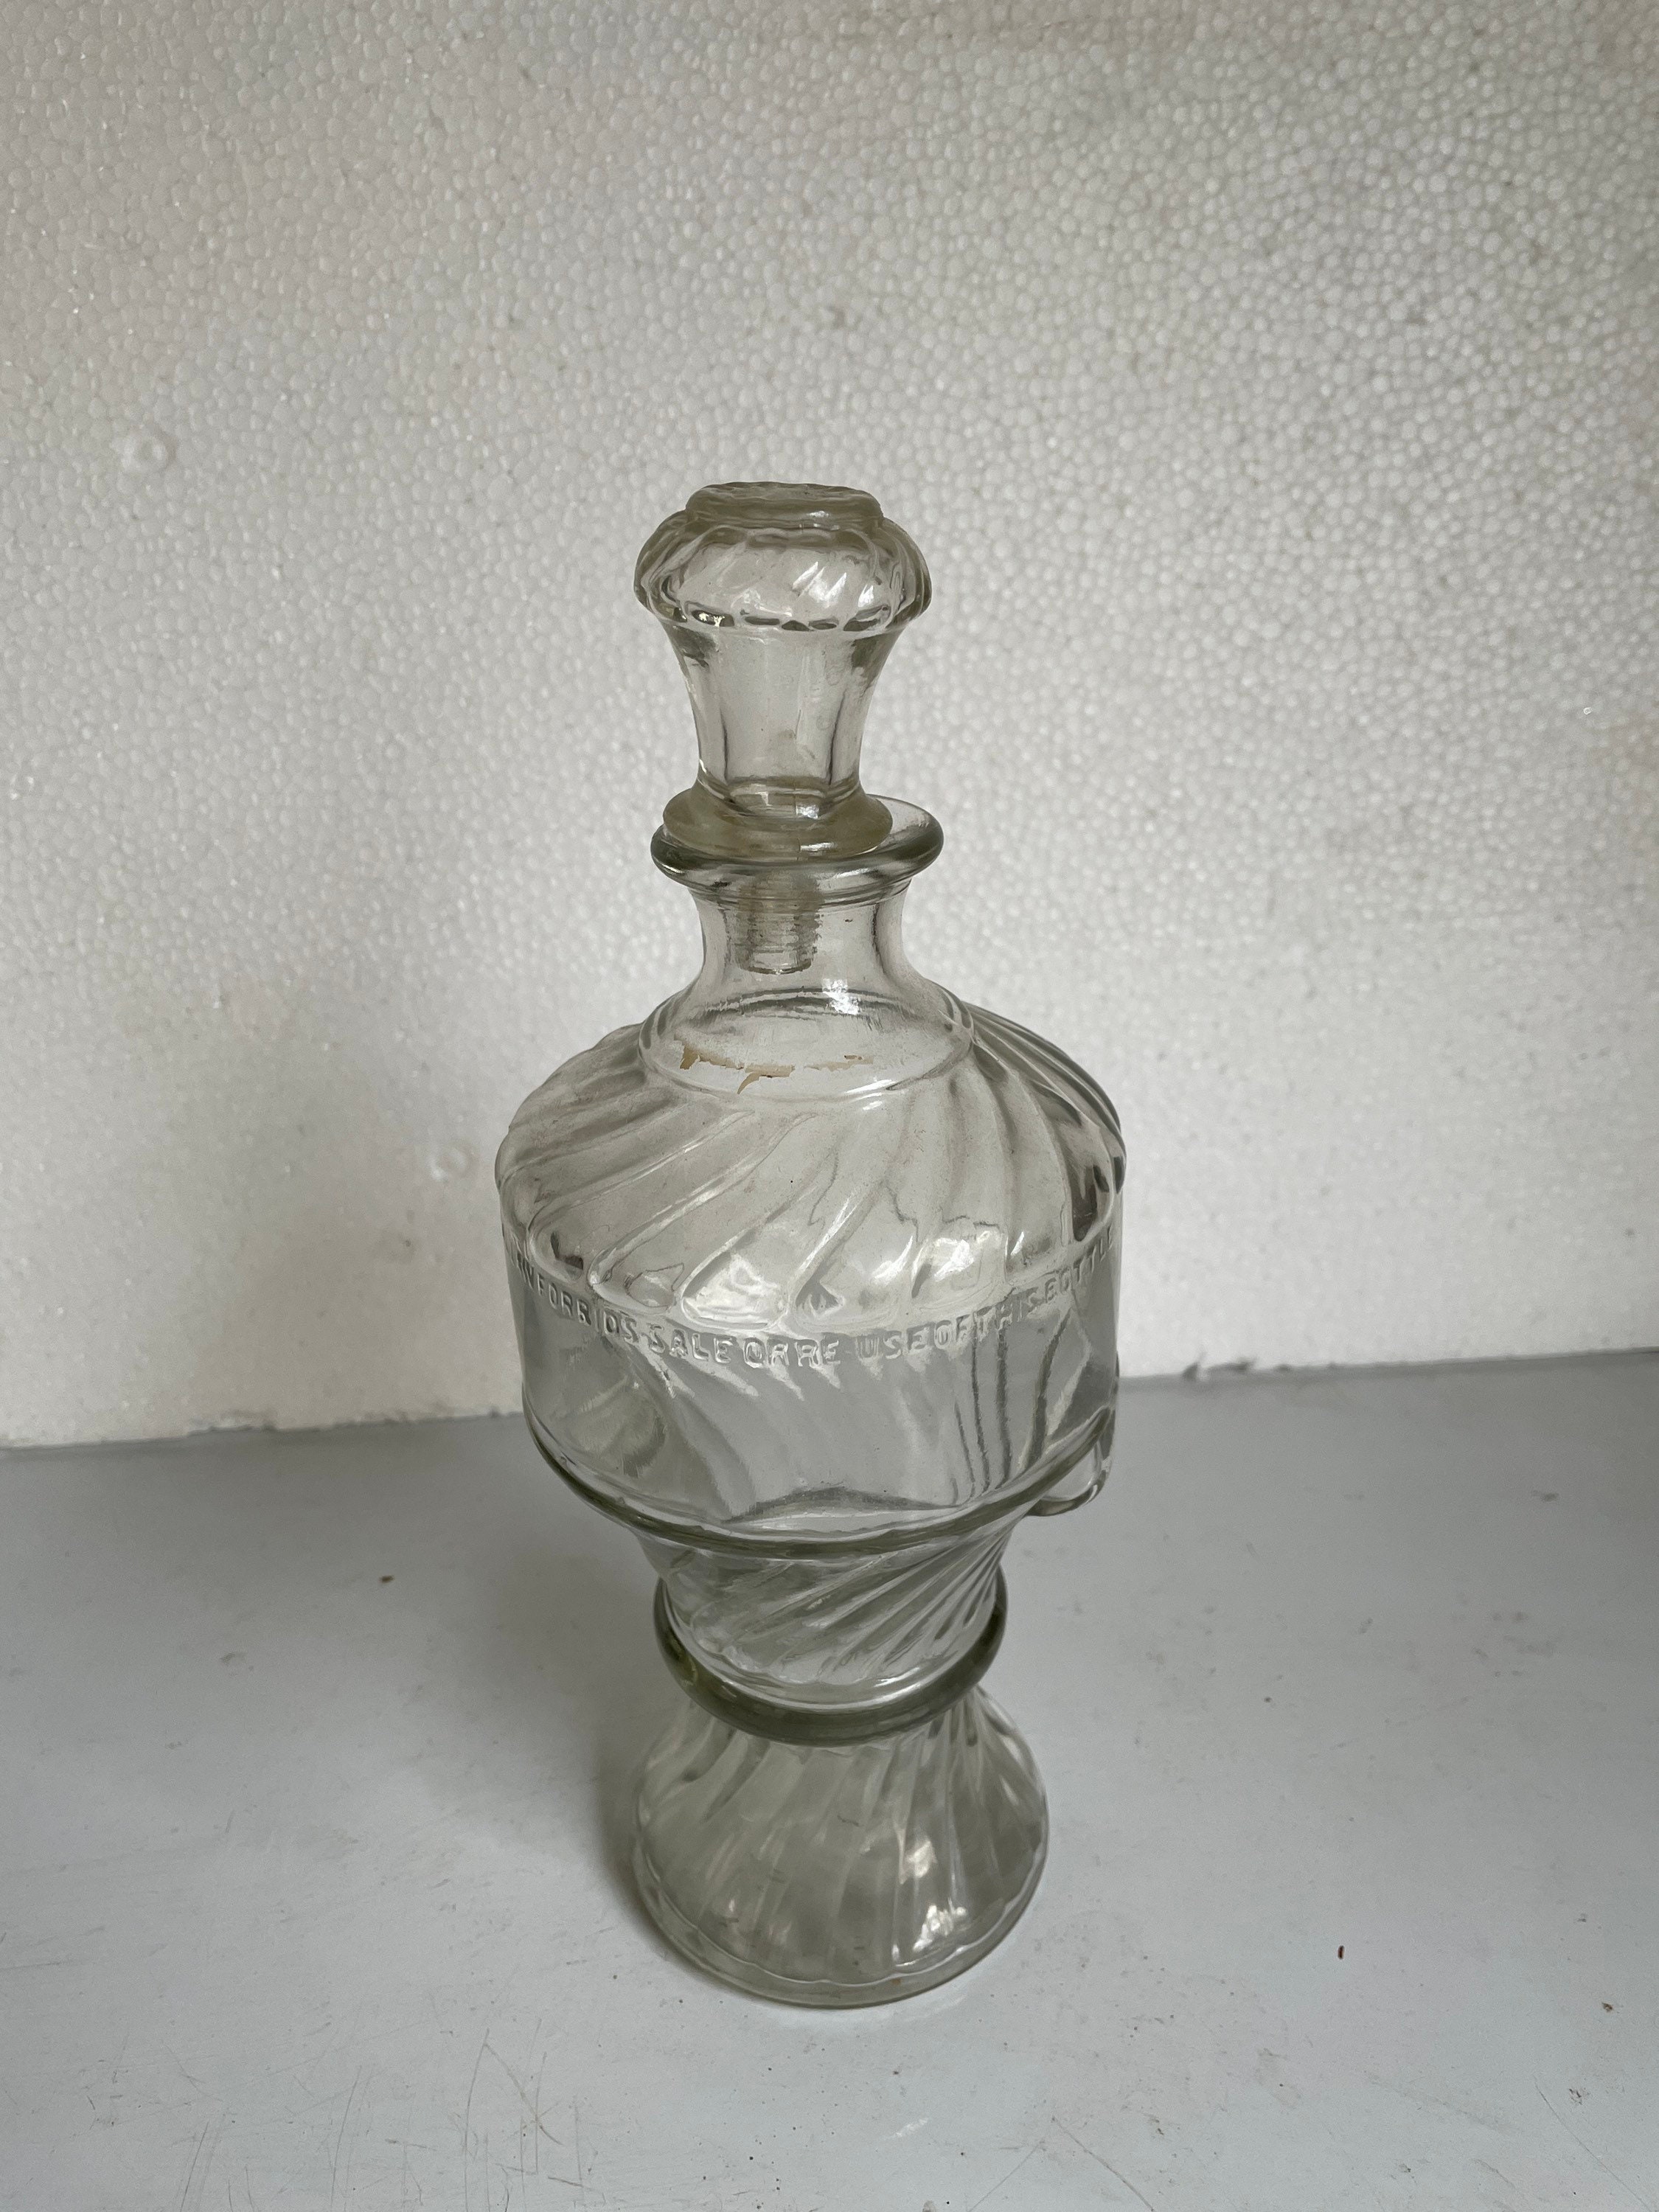 French Style PEWTER & GLASS DECANTER W/ Grape Adornments / Hinged